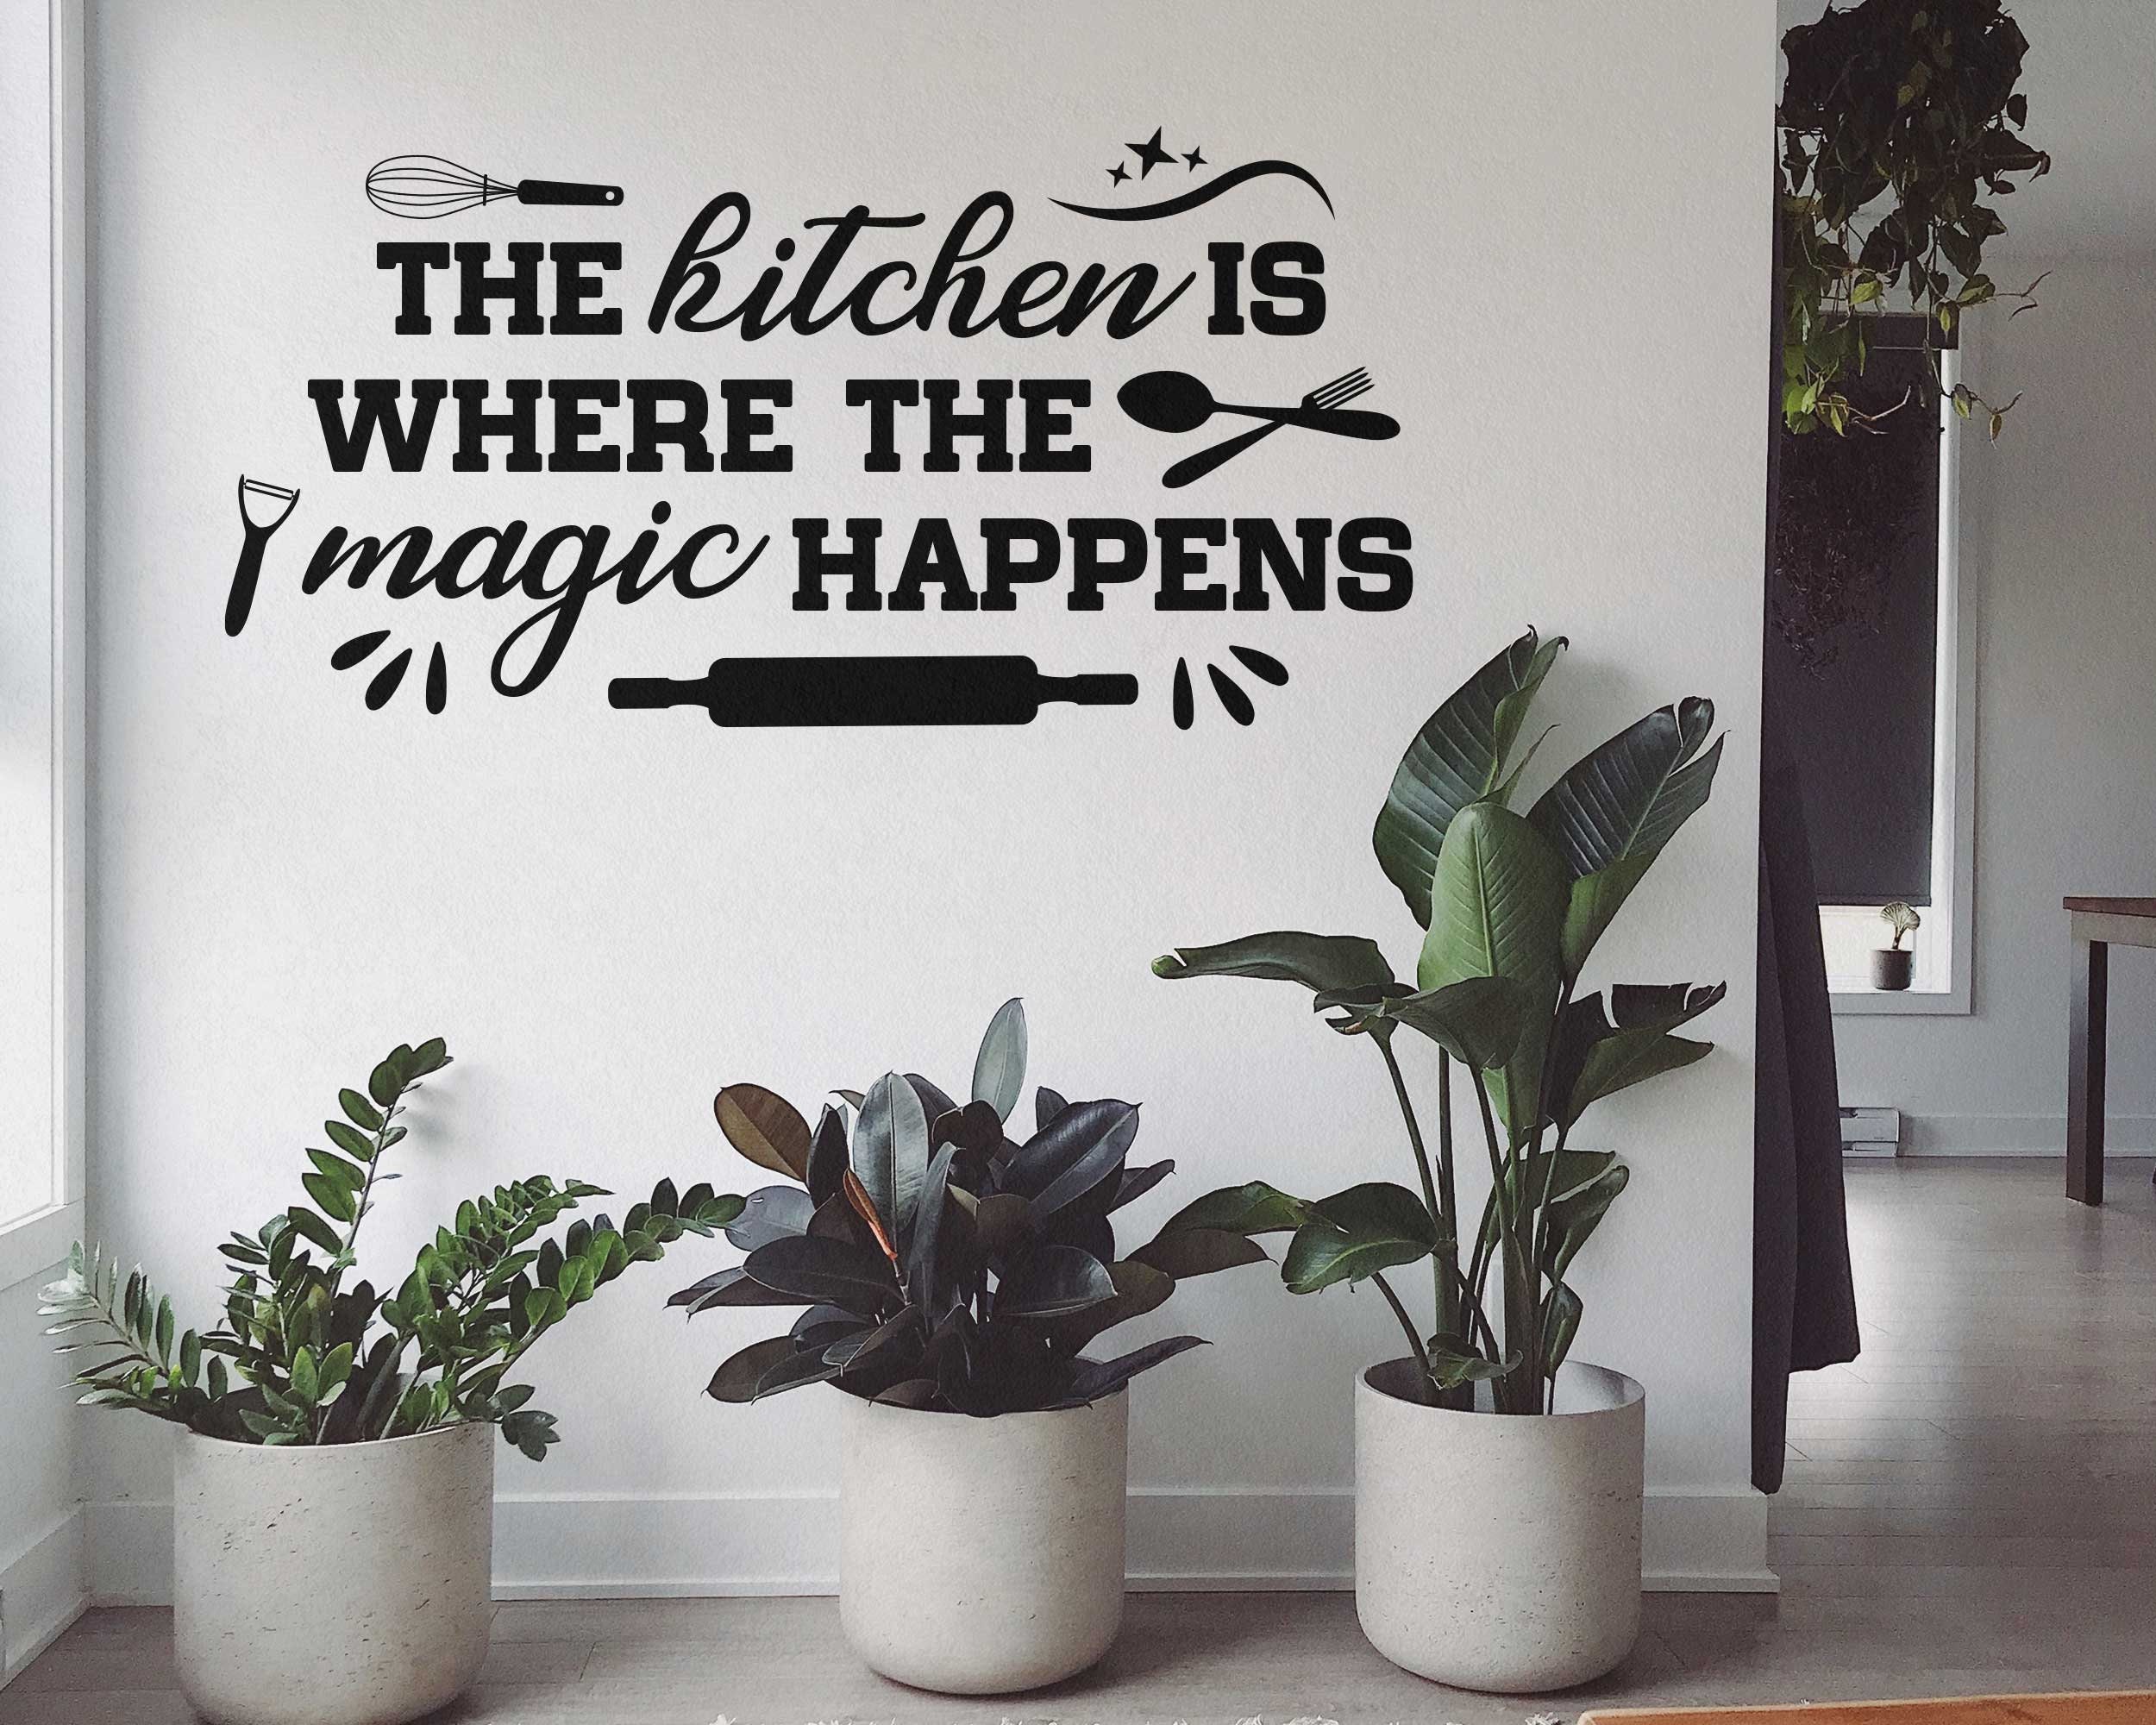 Kitchen Wall Quote the Kitchen is Where the Magic